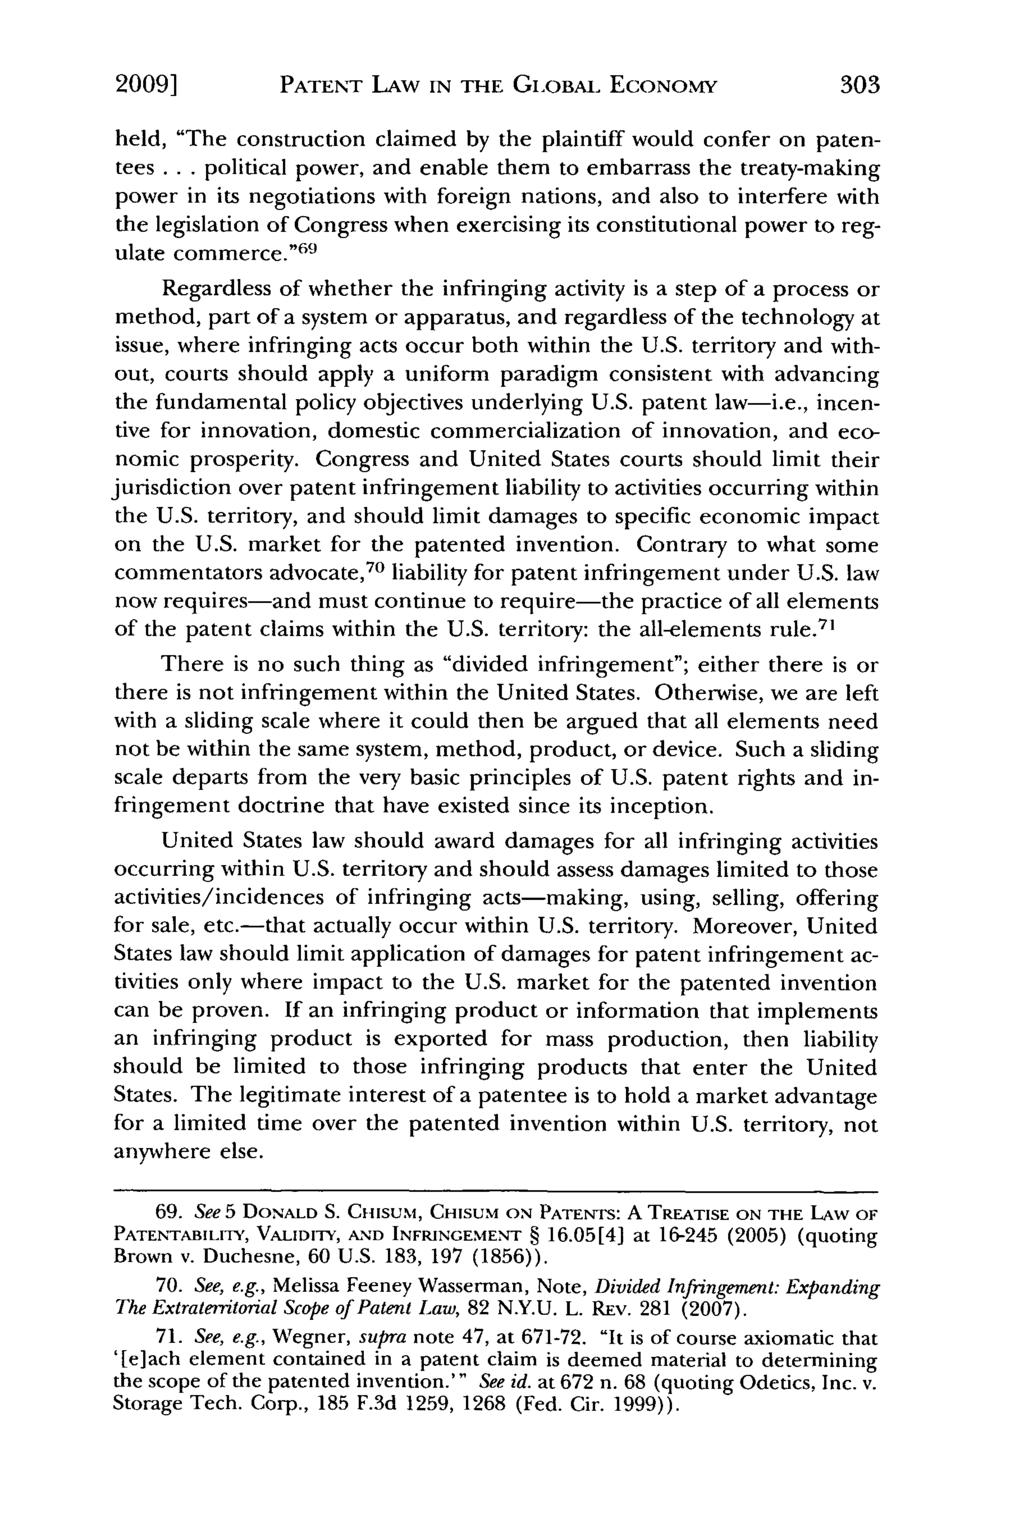 2009] Keyhani: Patent Law in the Global Economy: A Modest Proposal for U.S. Pate PATENT LAW IN THE GI.OBAL ECONOMY held, "The construction claimed by the plaintiff would confer on patentees.